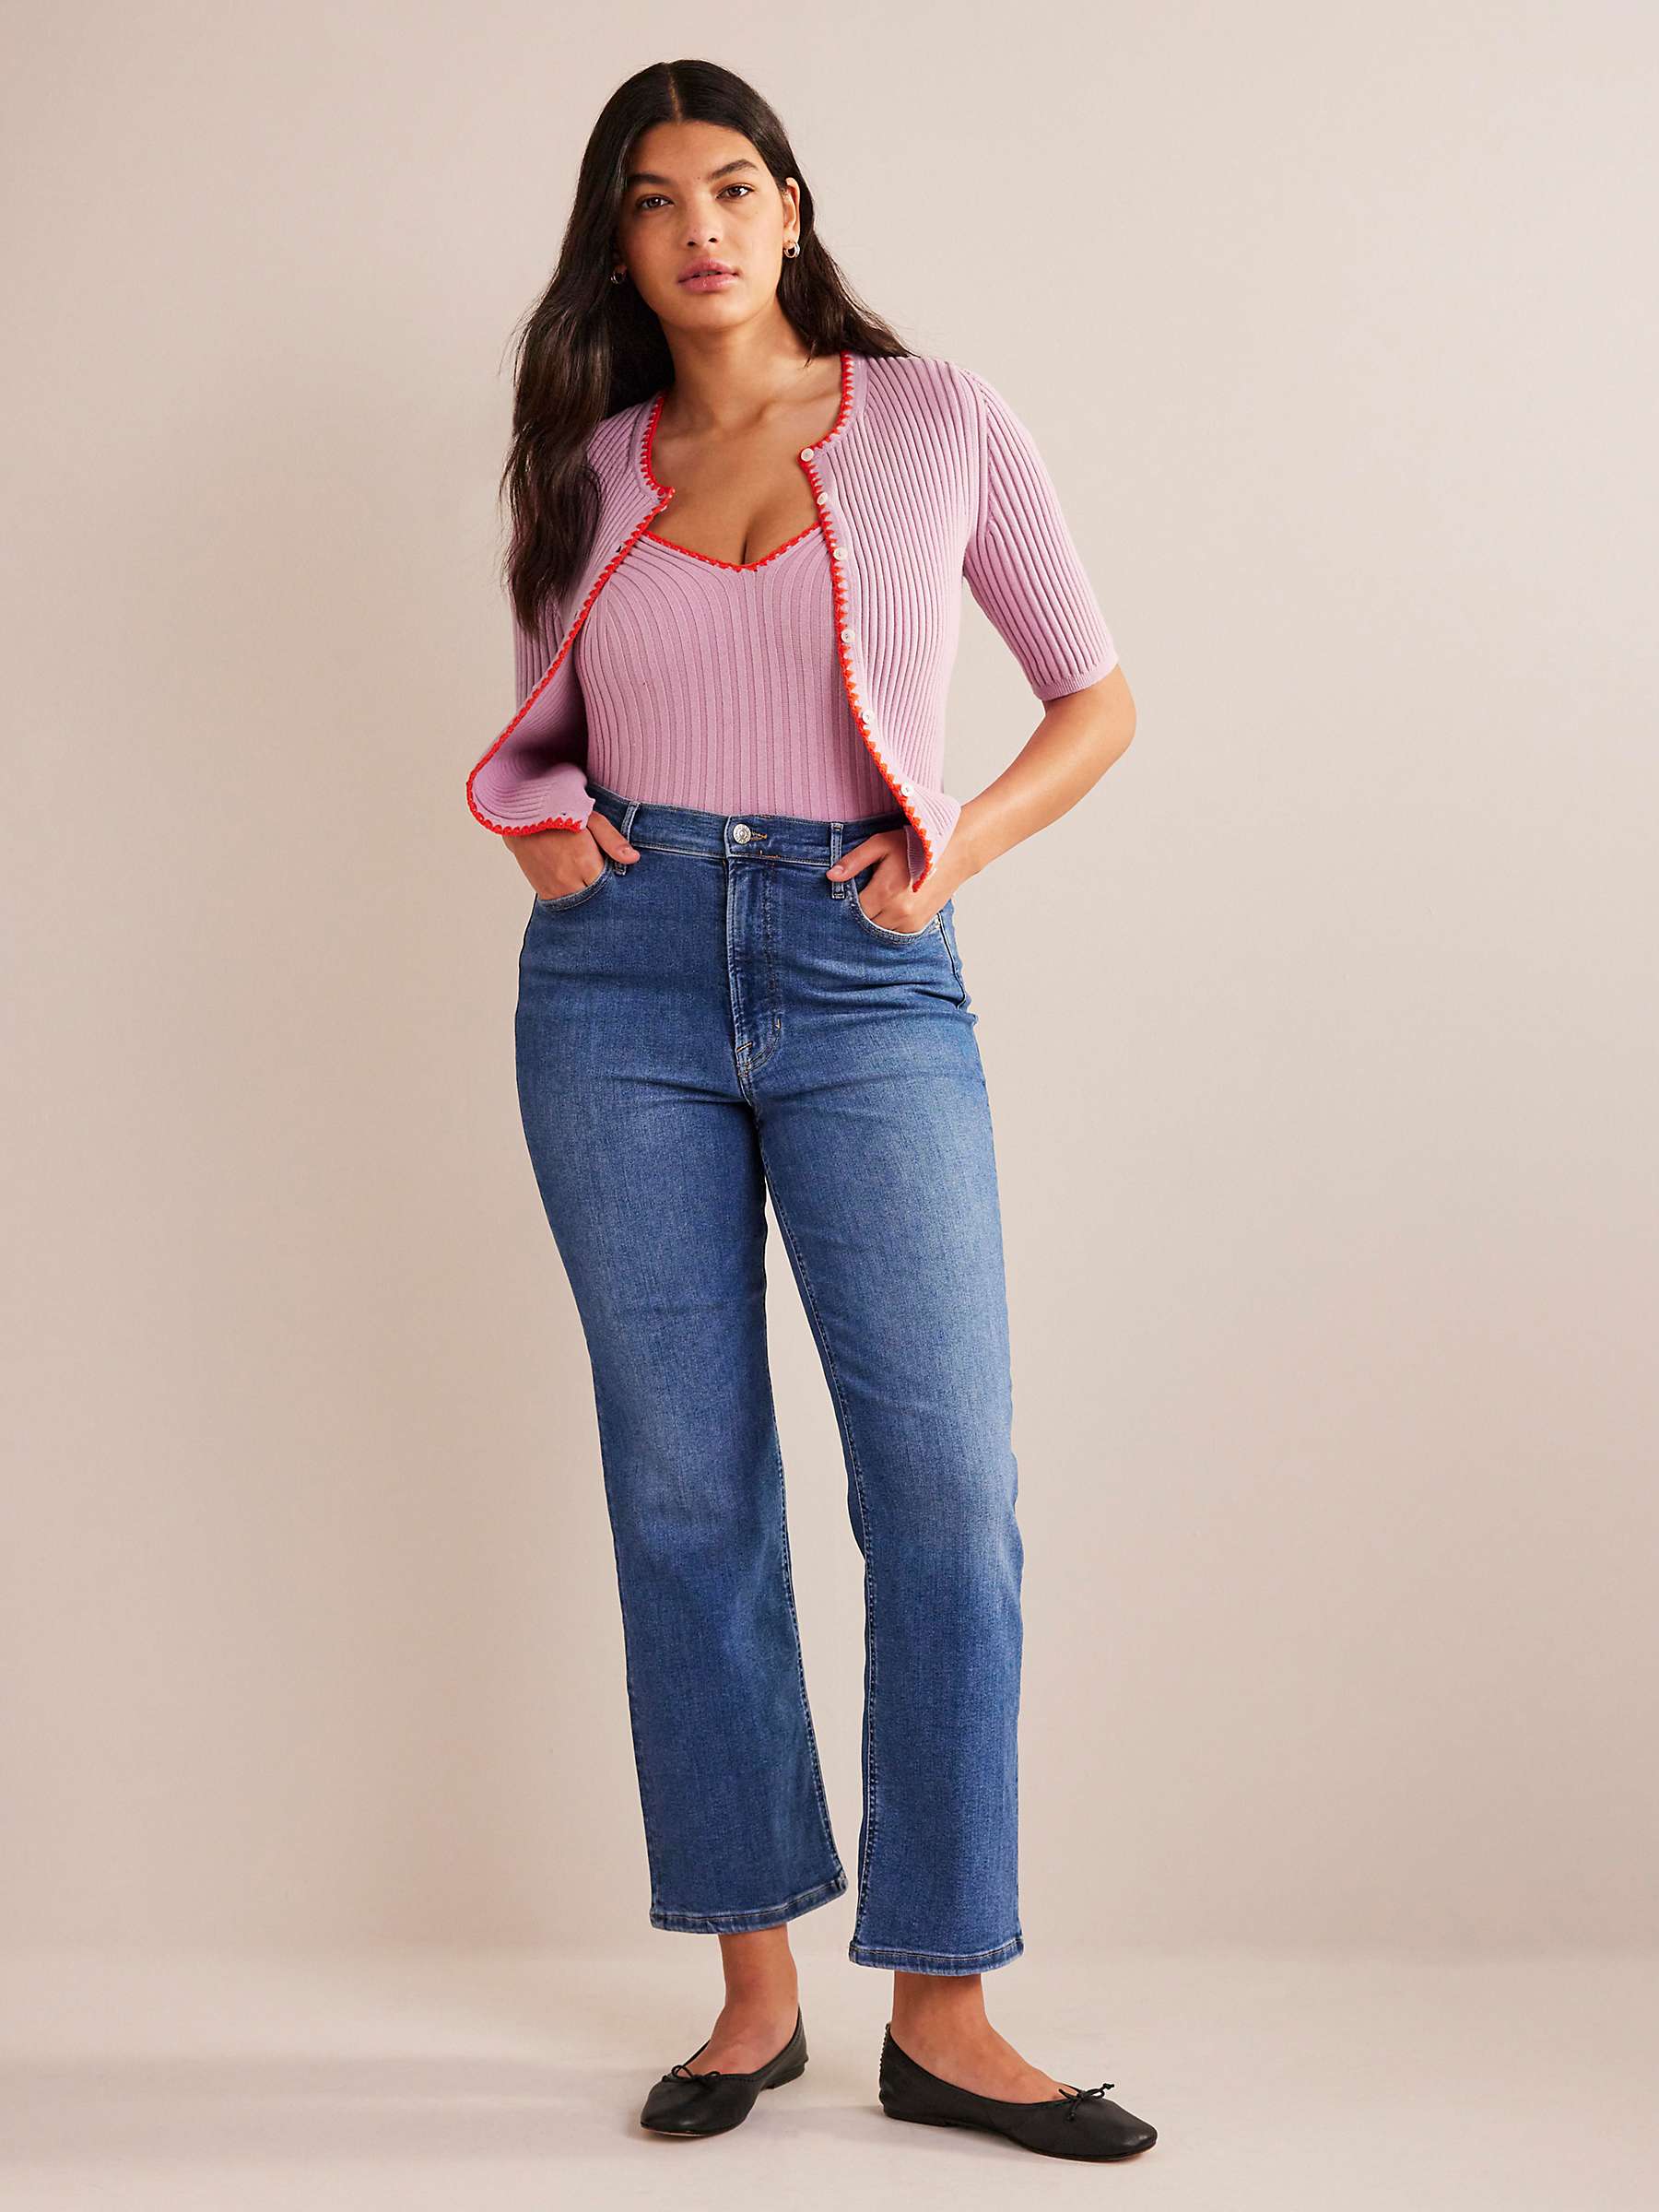 Buy Boden High Rise Power Stretch Straight Cut Jeans, Mid Vintage Online at johnlewis.com